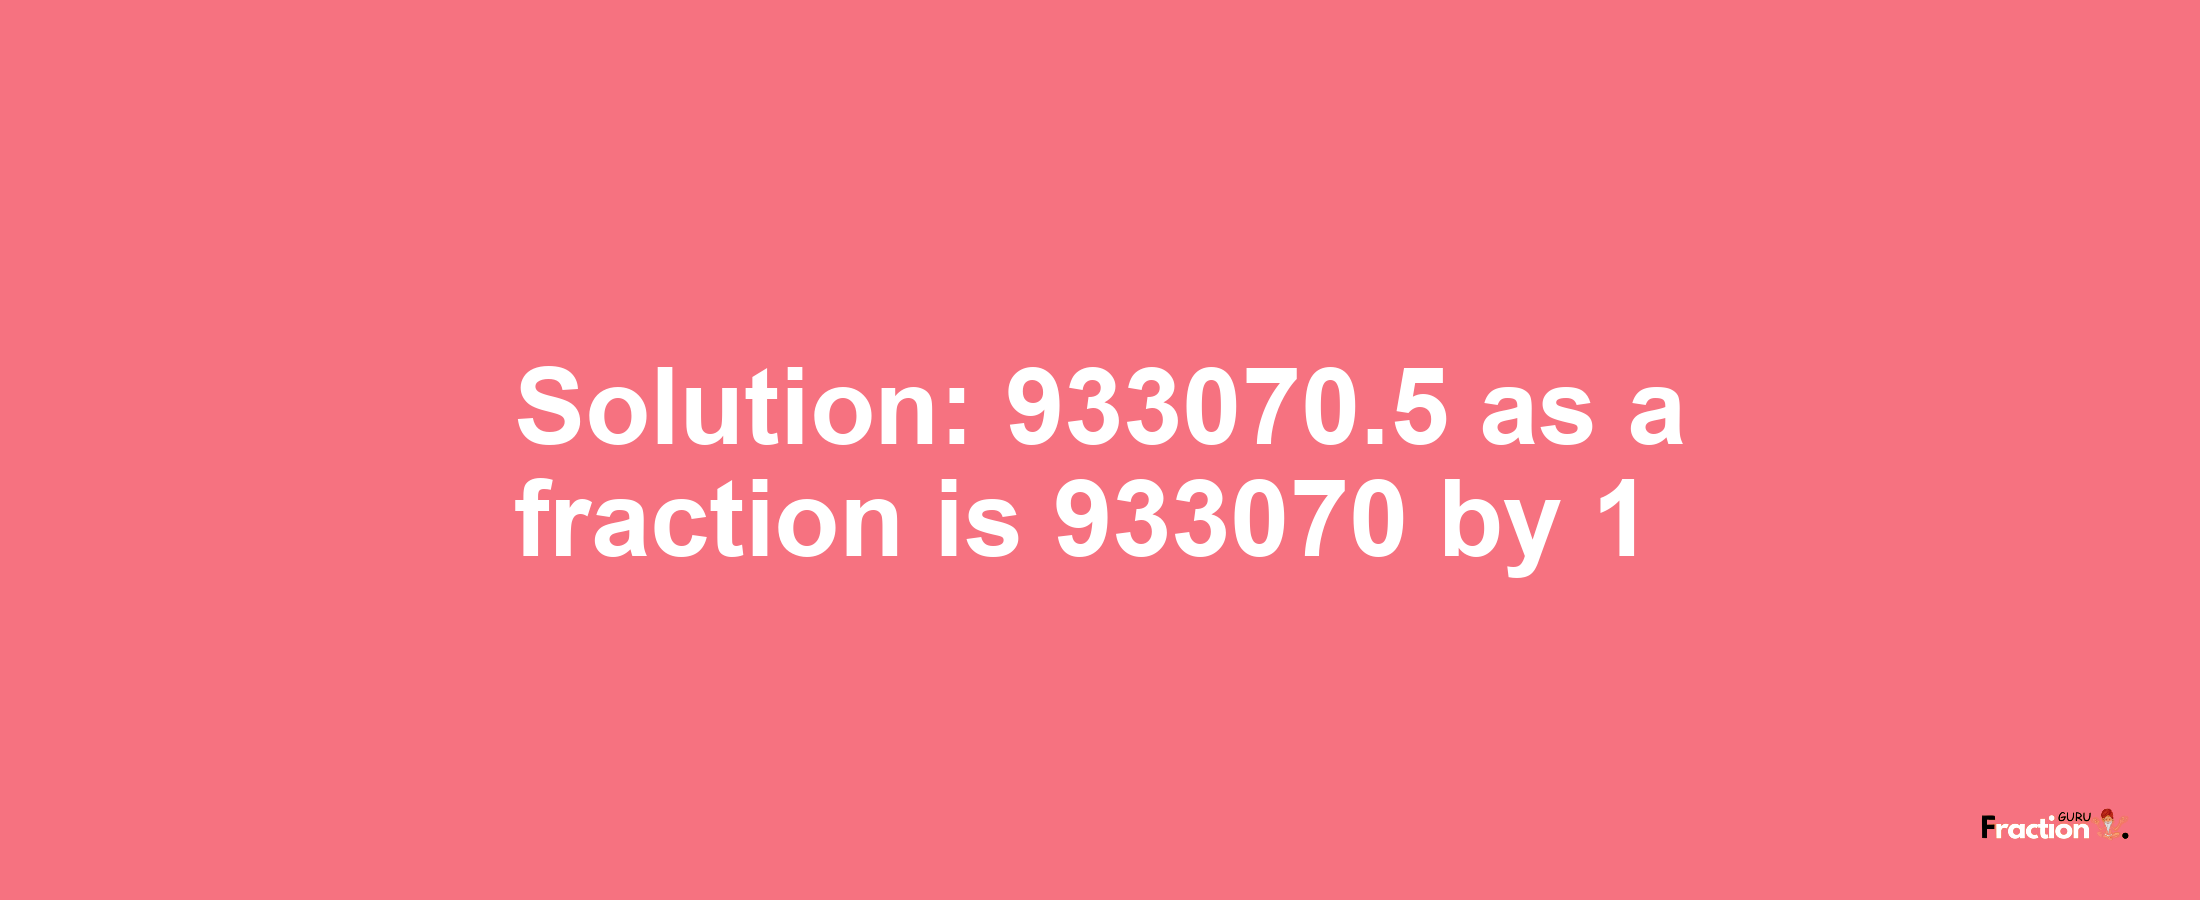 Solution:933070.5 as a fraction is 933070/1